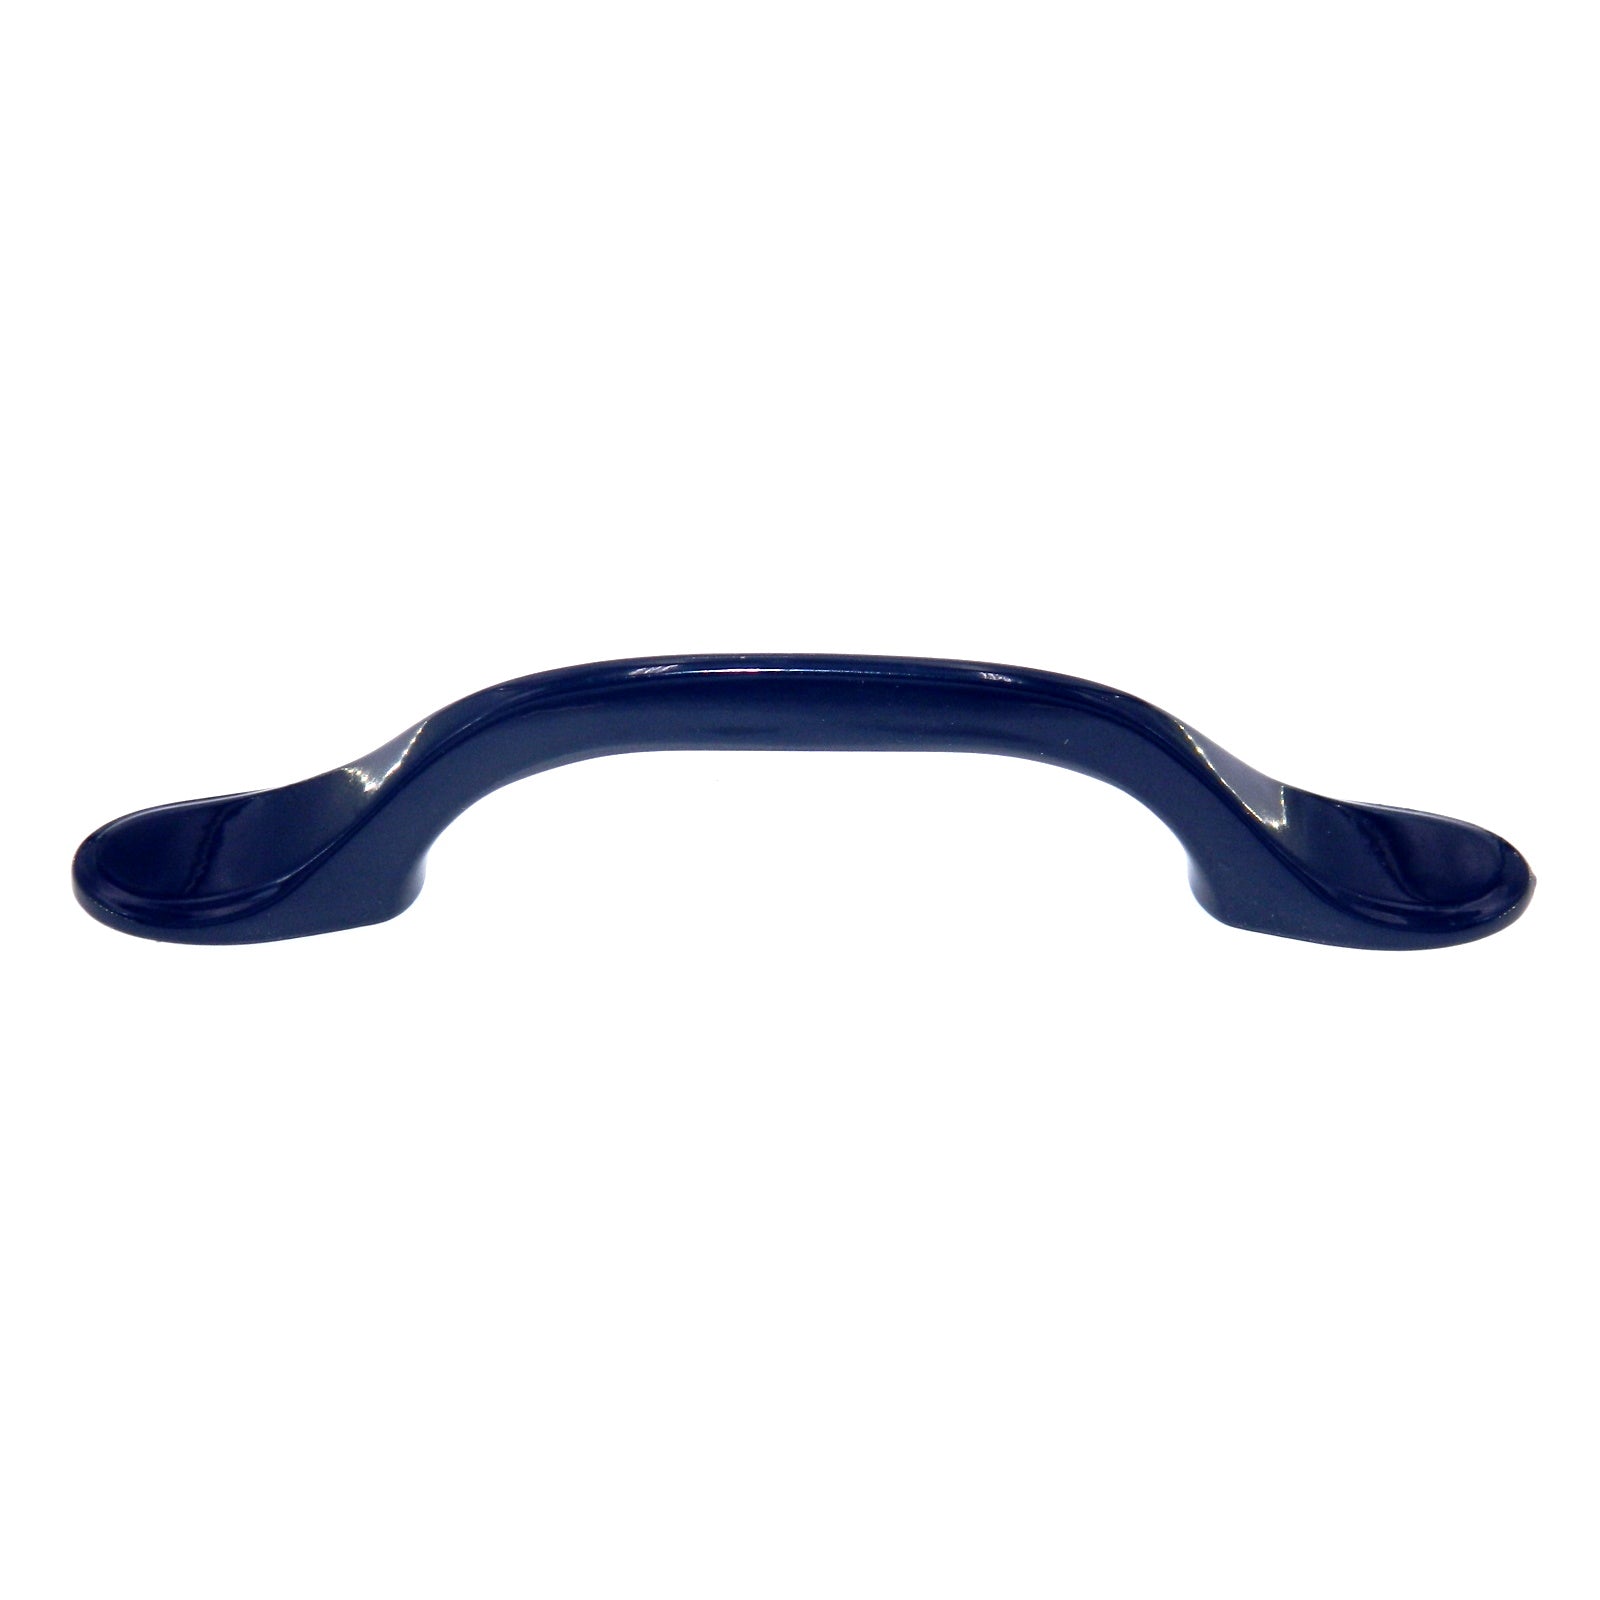 Amerock Colors Navy Blue 3" CTC Cabinet Arch Pull Handle BP76280-NB